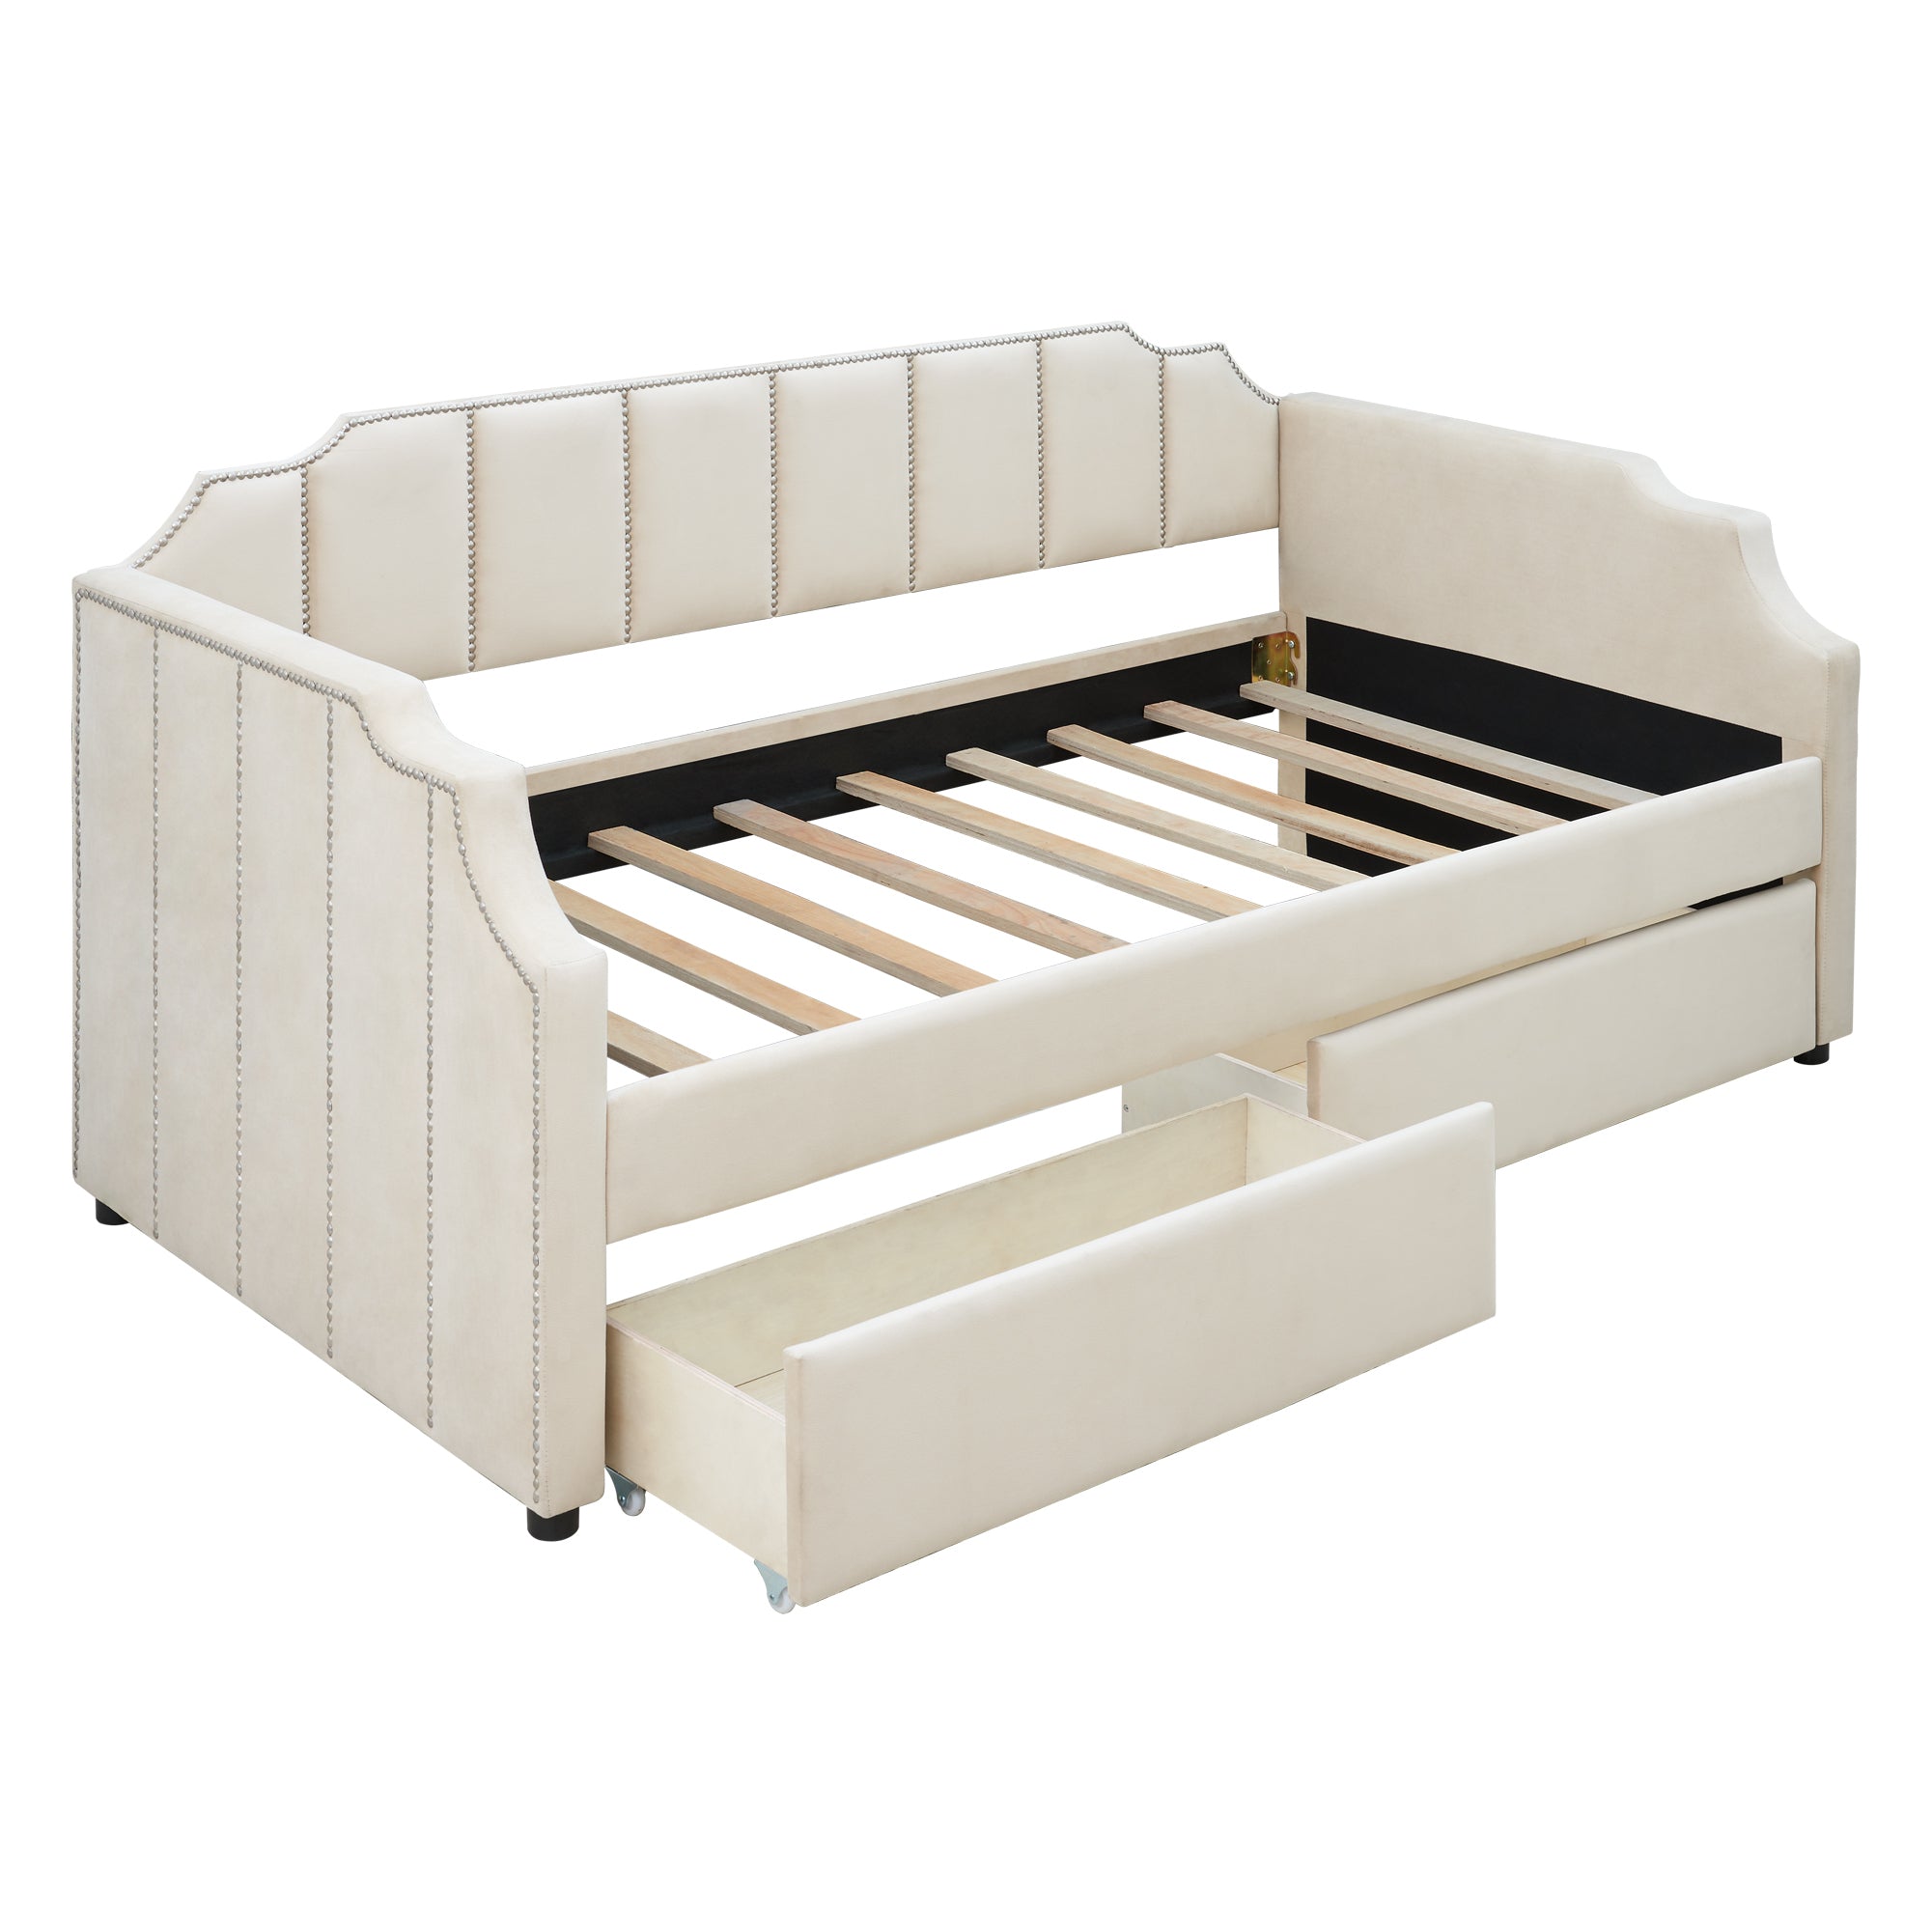 NOBLEMOOD Twin Size Upholstered Daybed with Two Storage Drawers for Kids Bedroom,Solid Wooden Bedframe w/Strong Wood Slat Support & Safety Guardrails, Beige